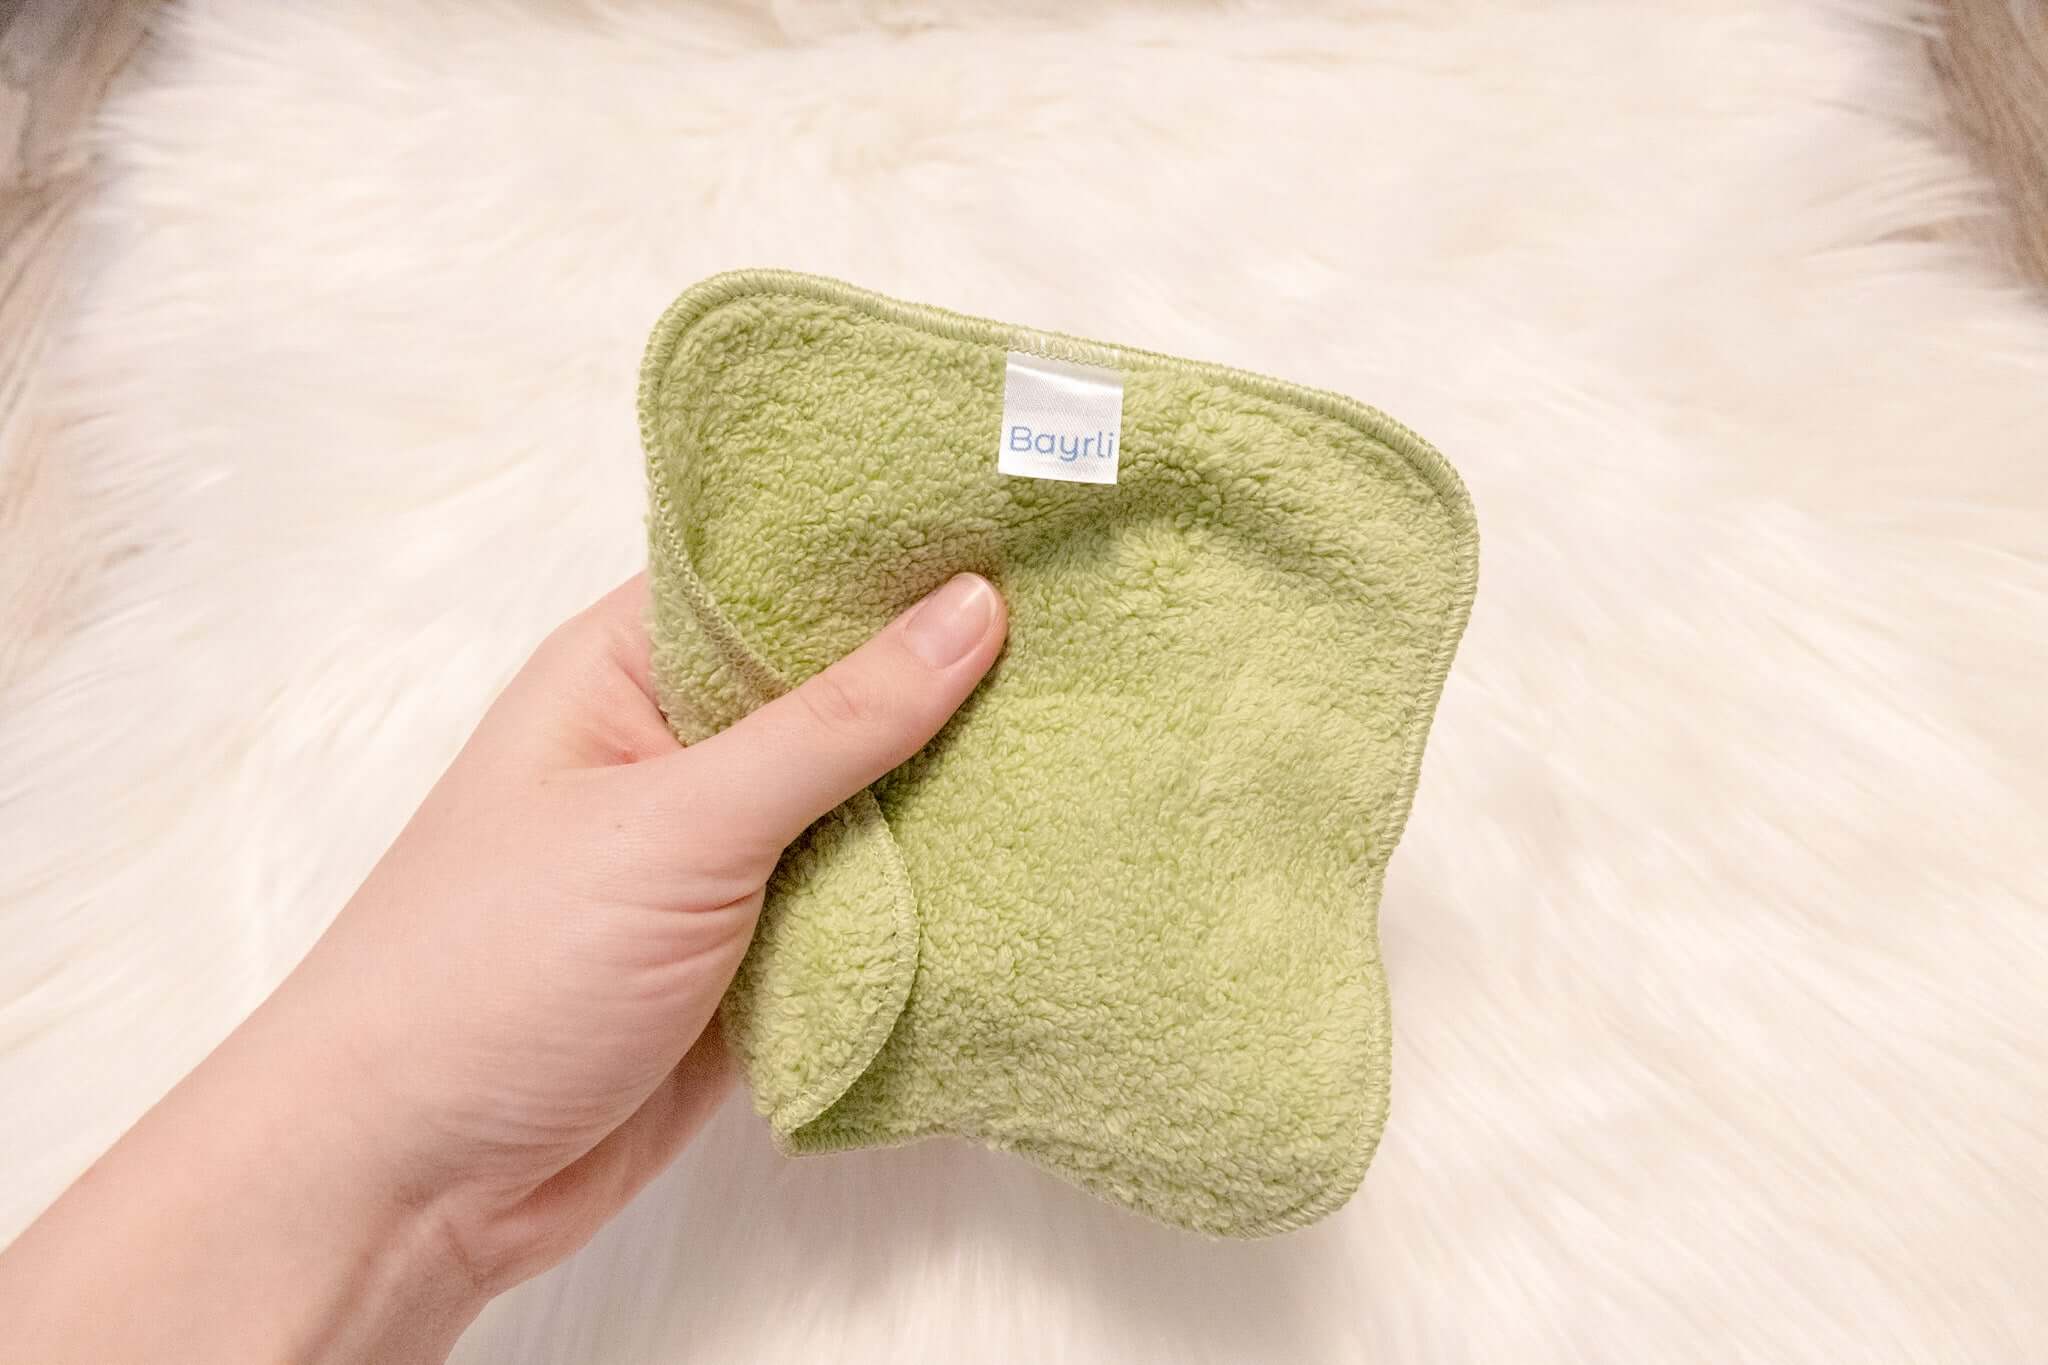 Bayrli®The complete guide to using cloth wipes with your baby